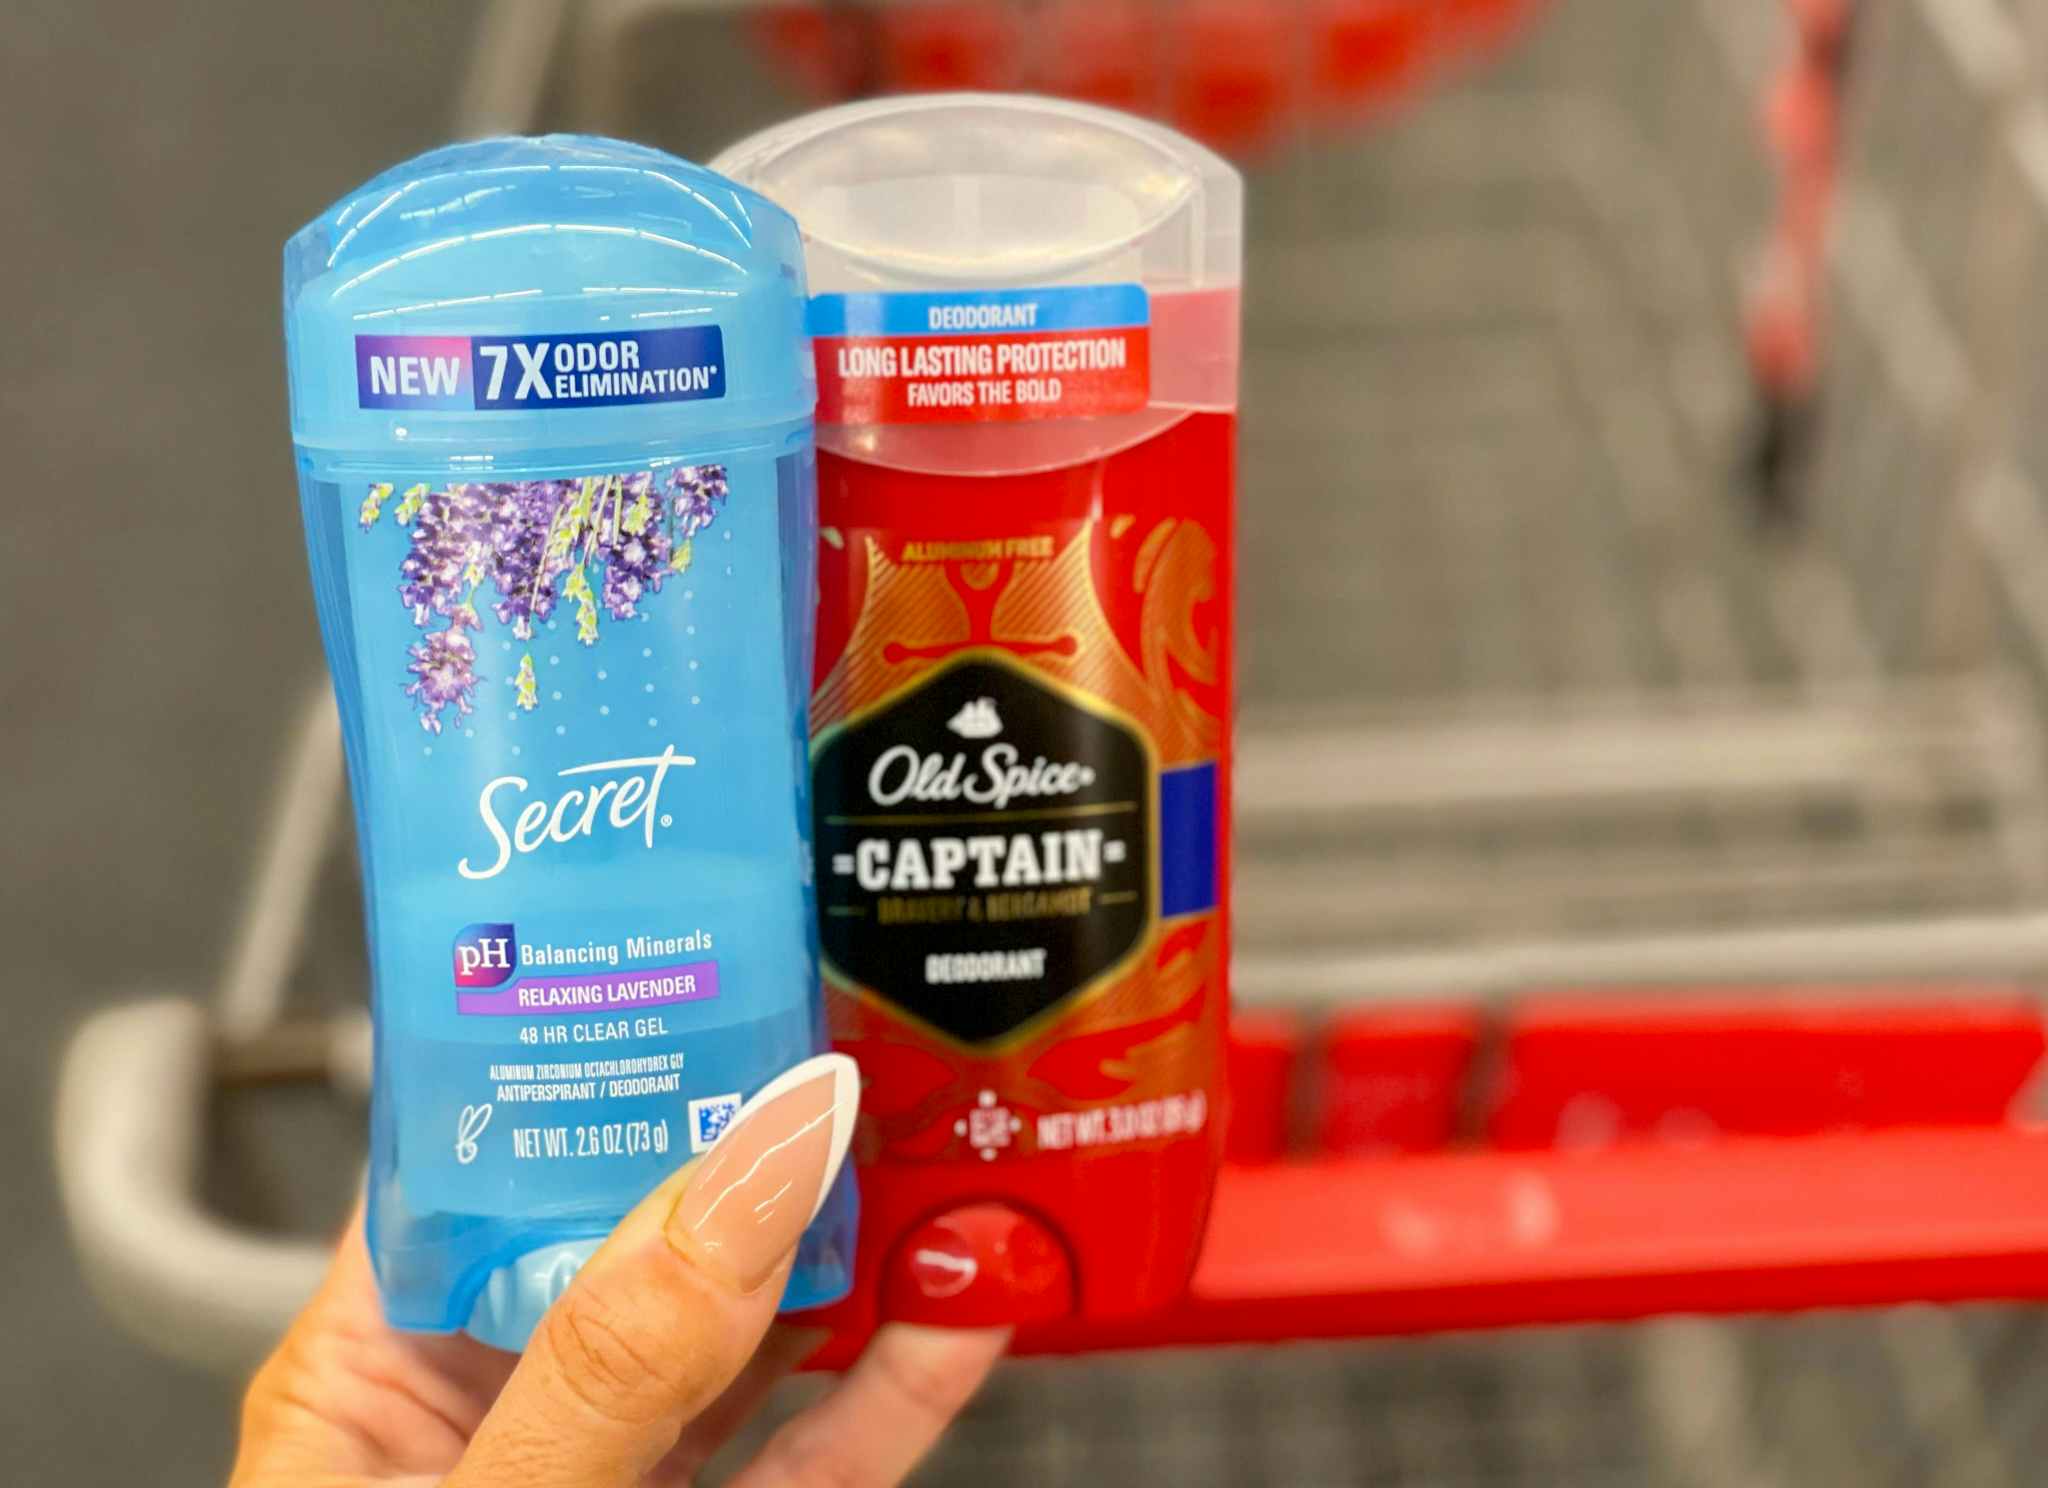 secret and old spice deodorant held in hand